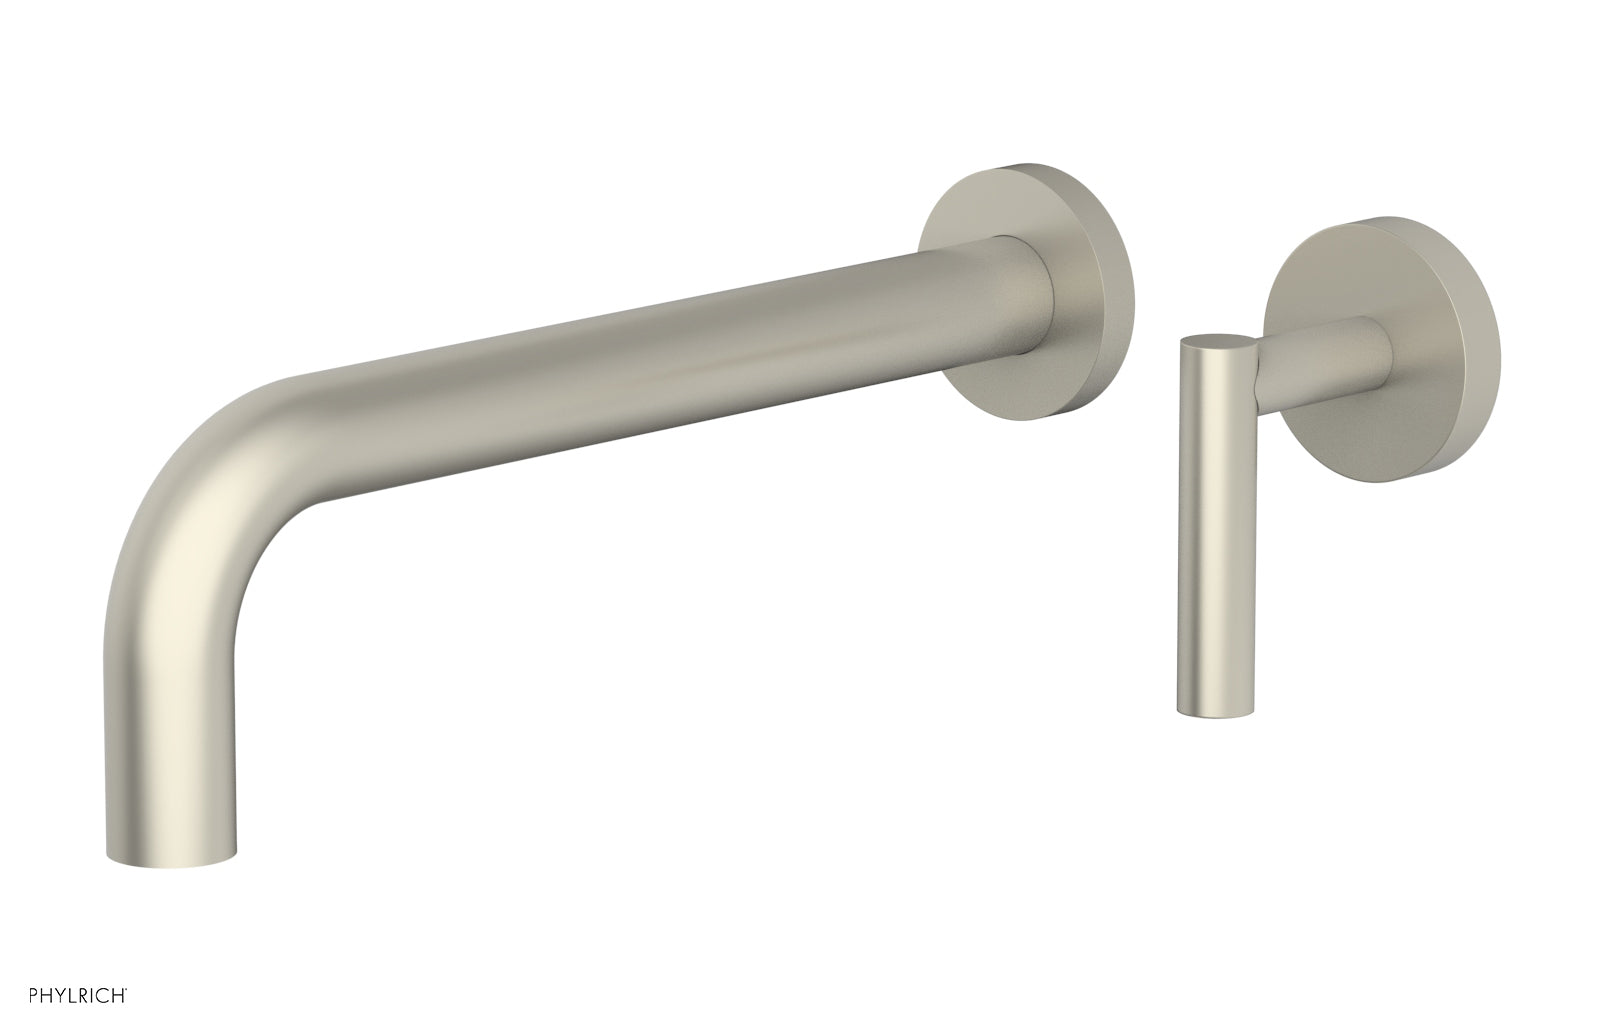 Phylrich TRANSITION 10" Single Handle Wall Lavatory Set - Lever Handle